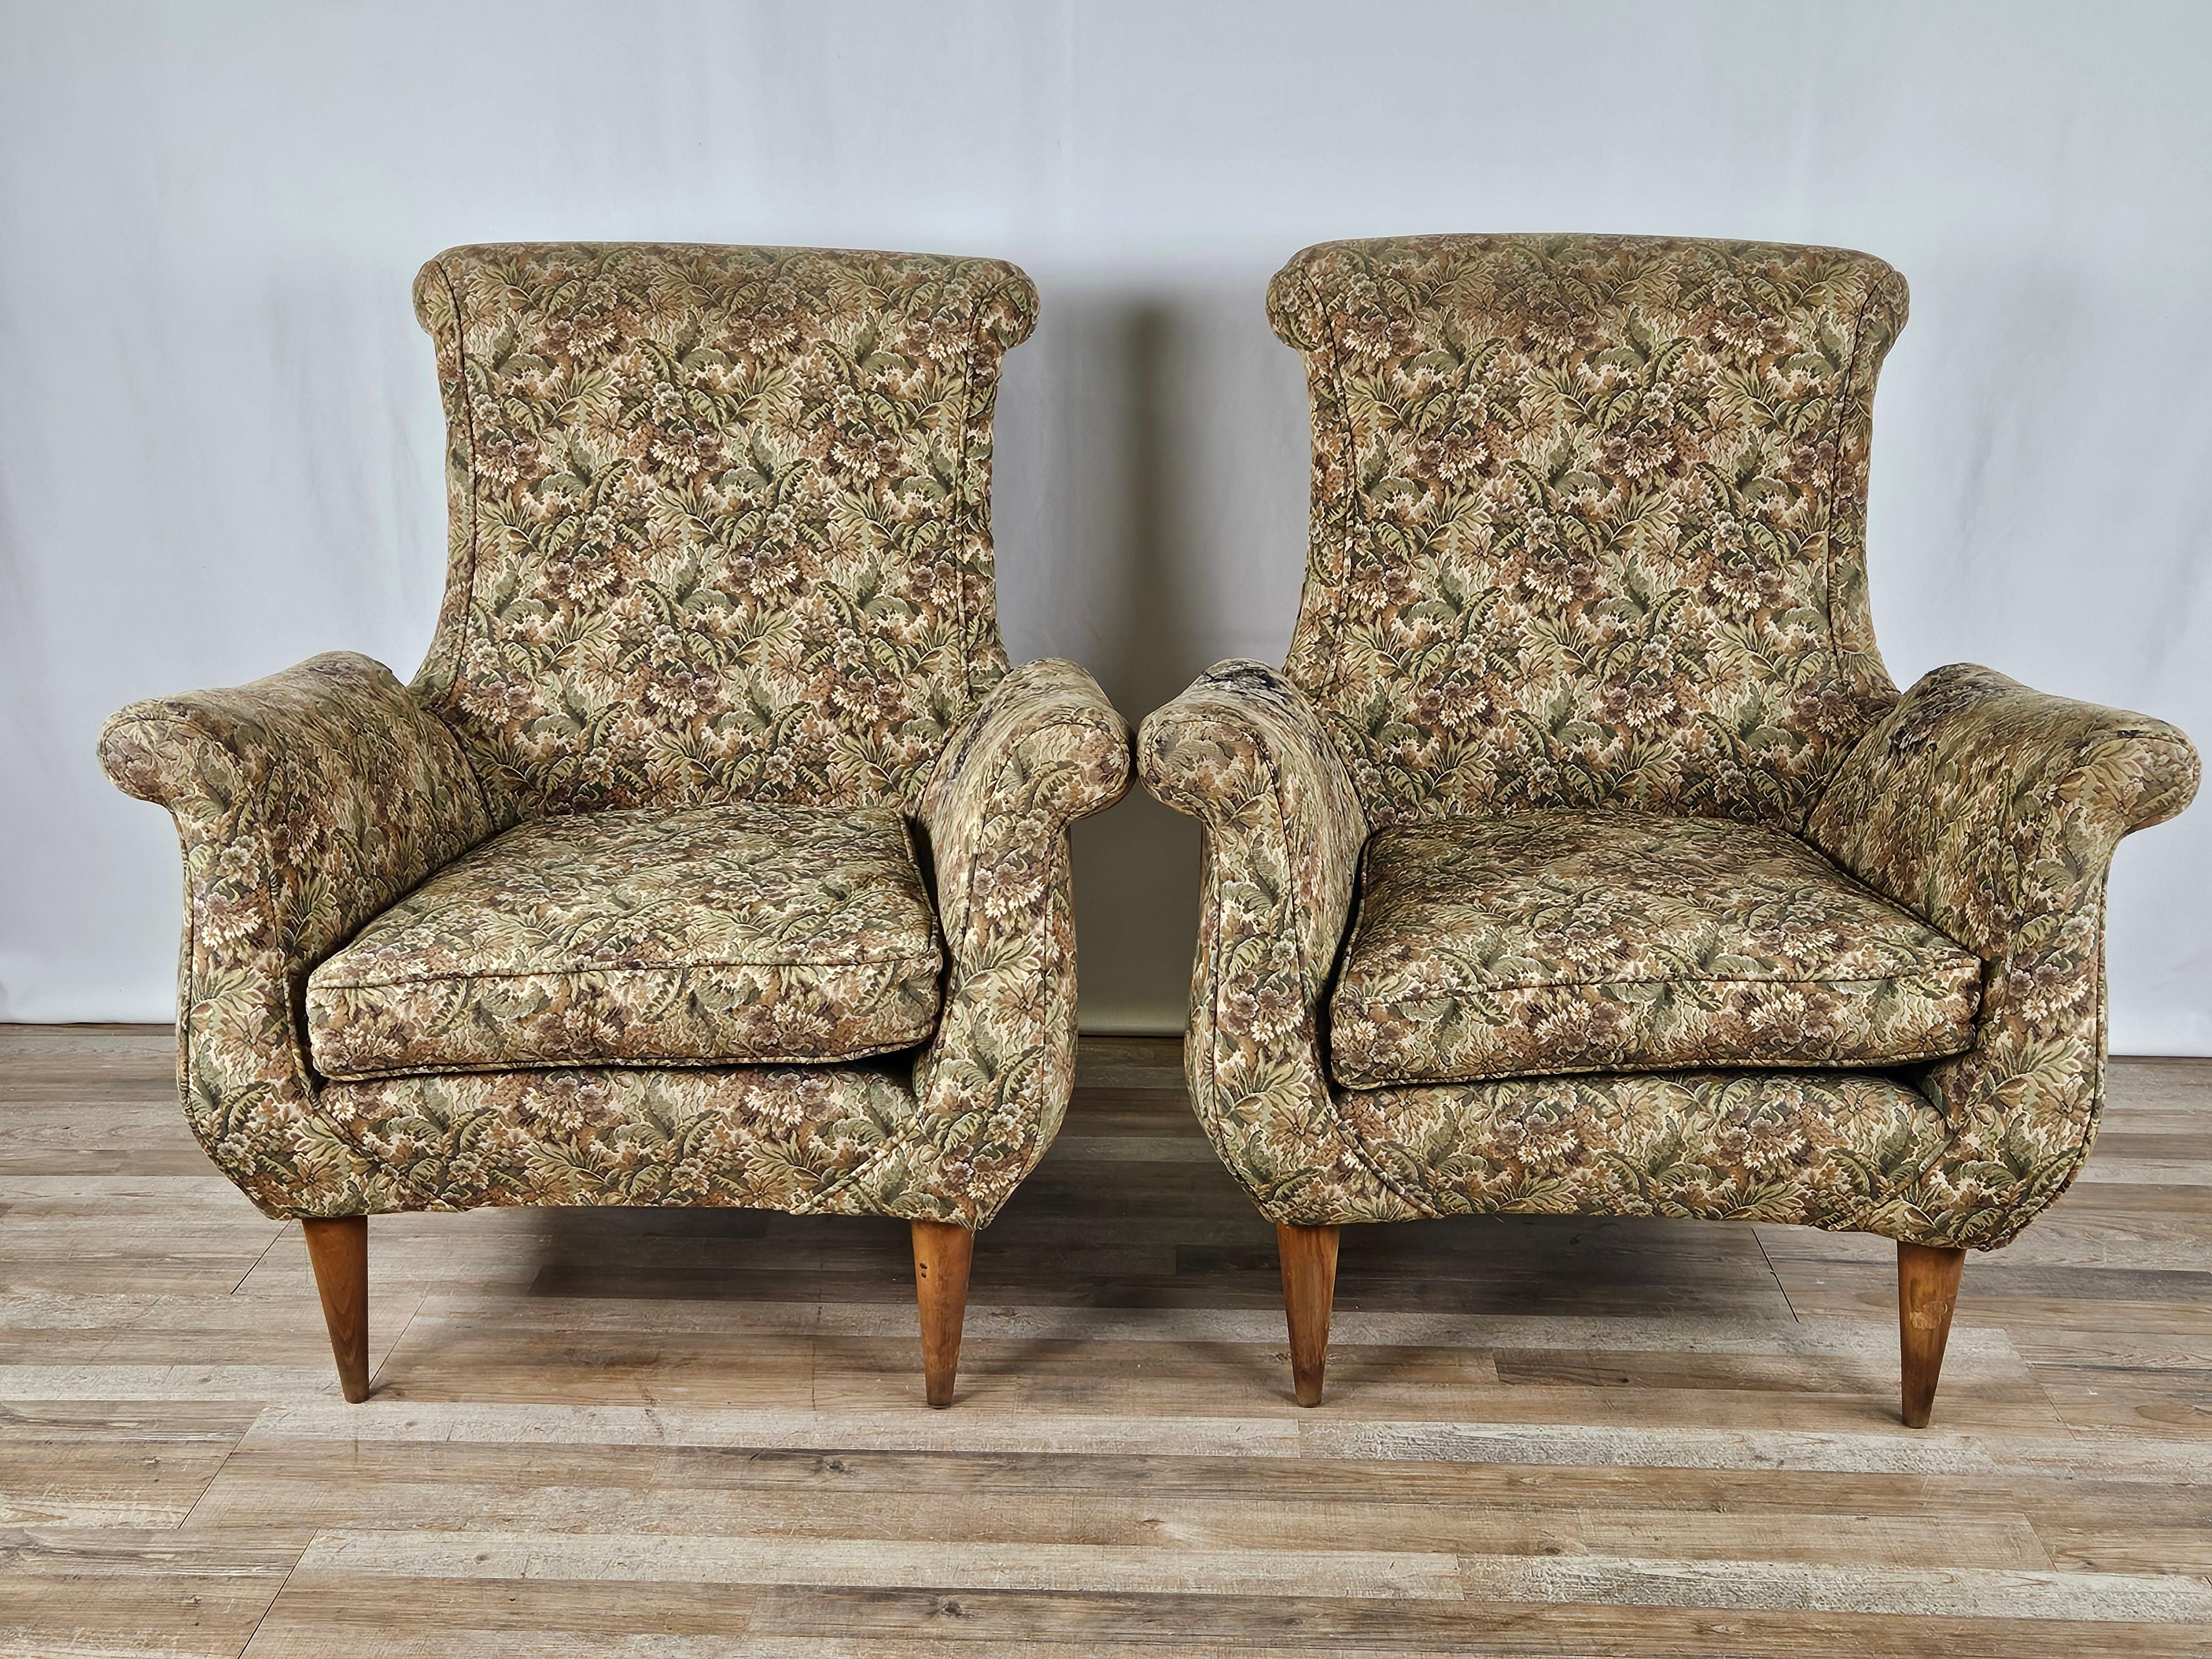 Large 1970s Italian modern antique armchairs with upholstered cushion and wooden feet.

Sound structure and sturdy chair.

The fabric needs to be replaced as pictured.